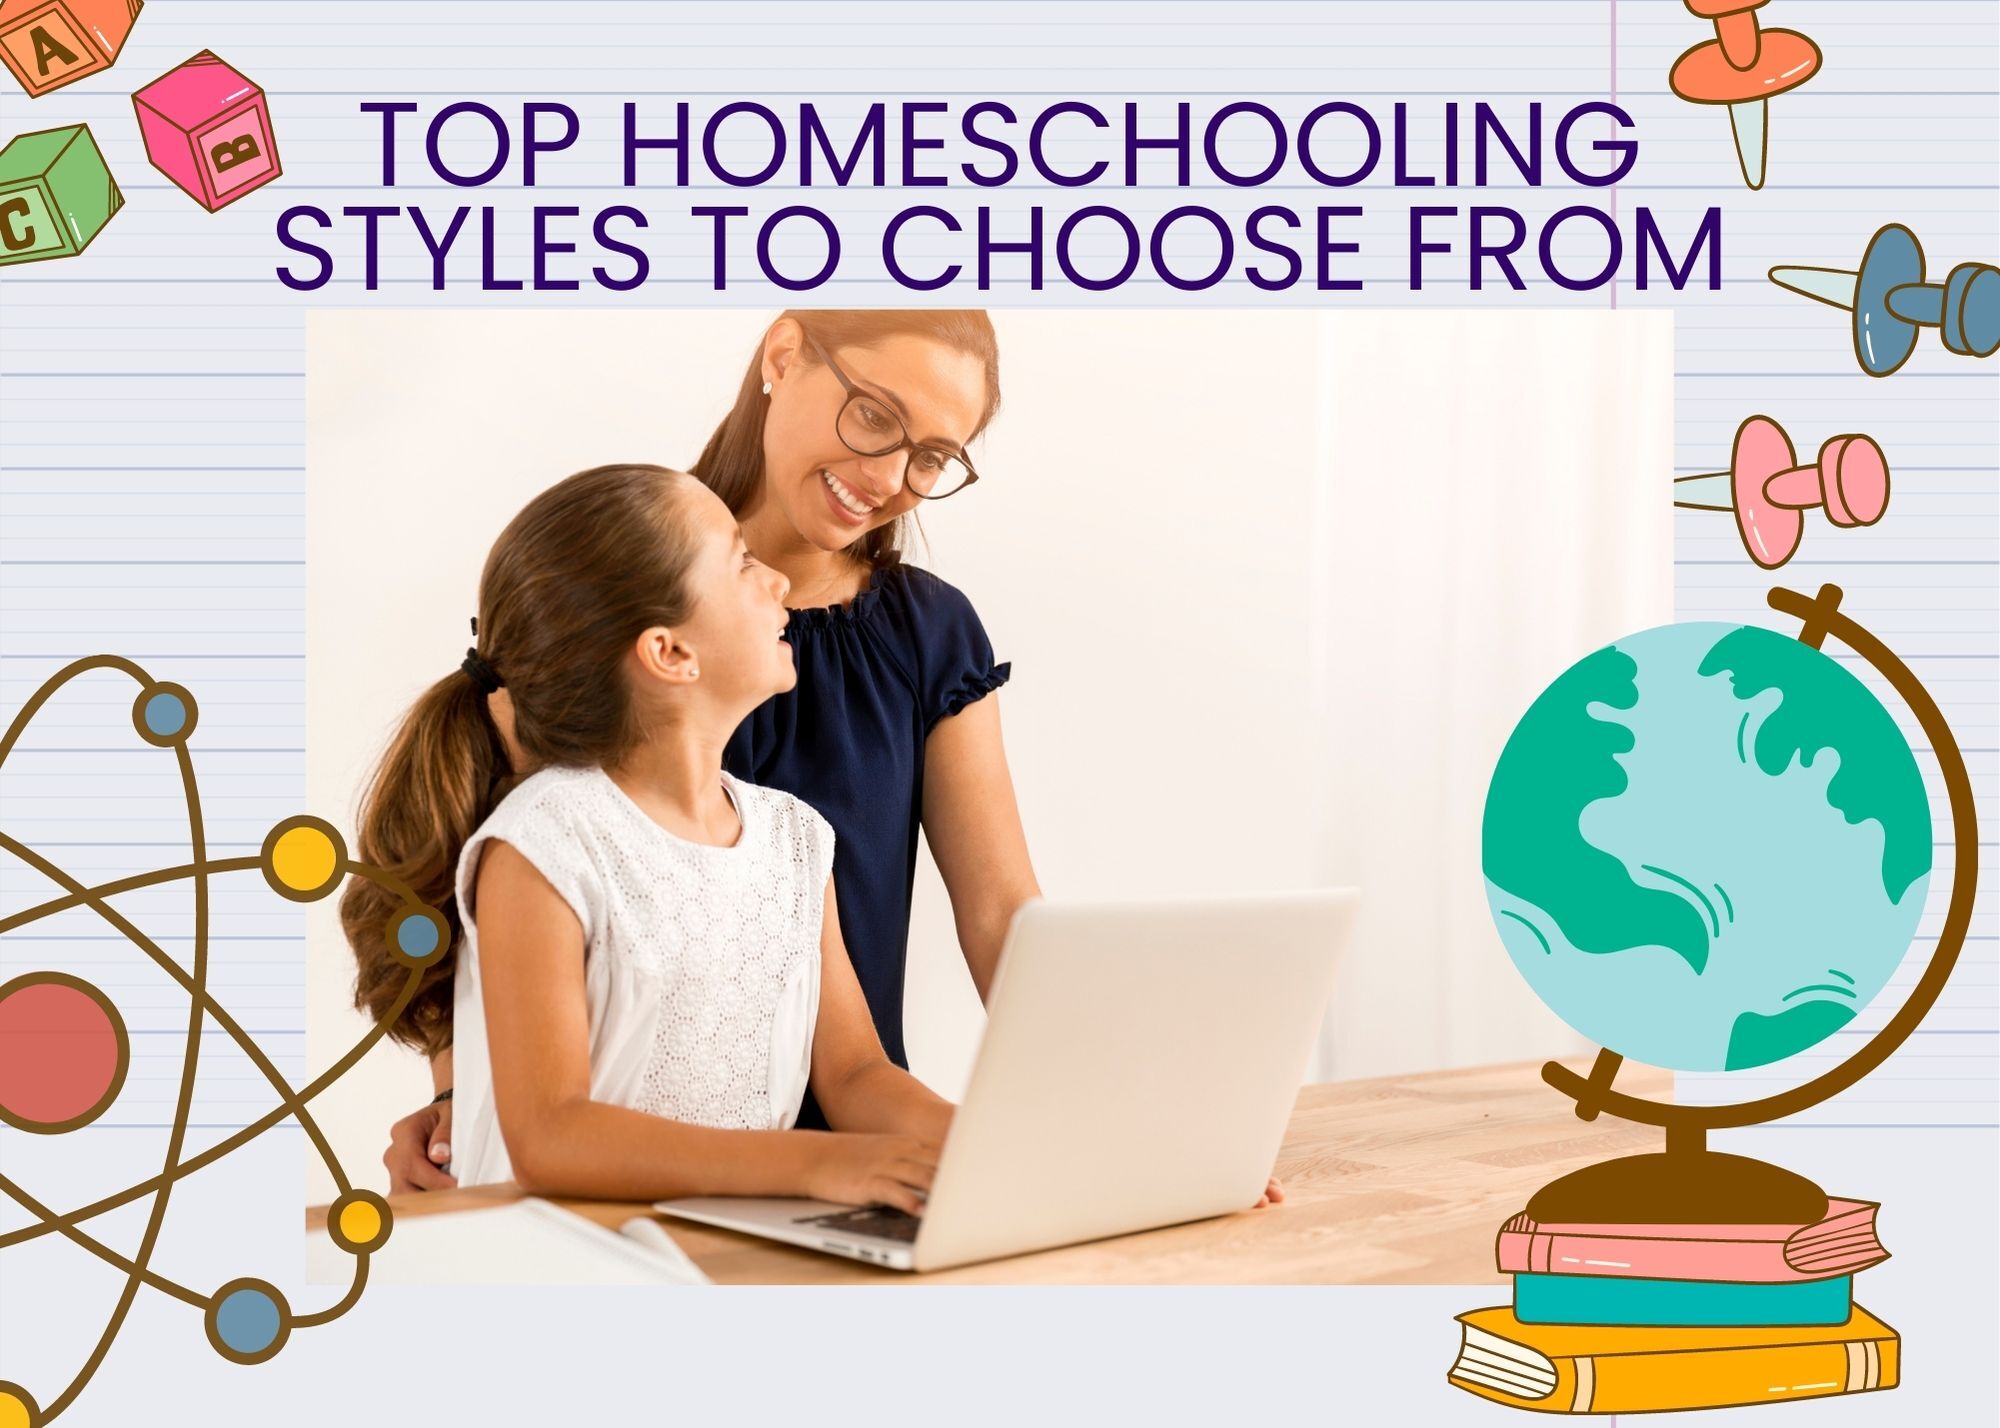 Top Homeschooling Styles to Choose From